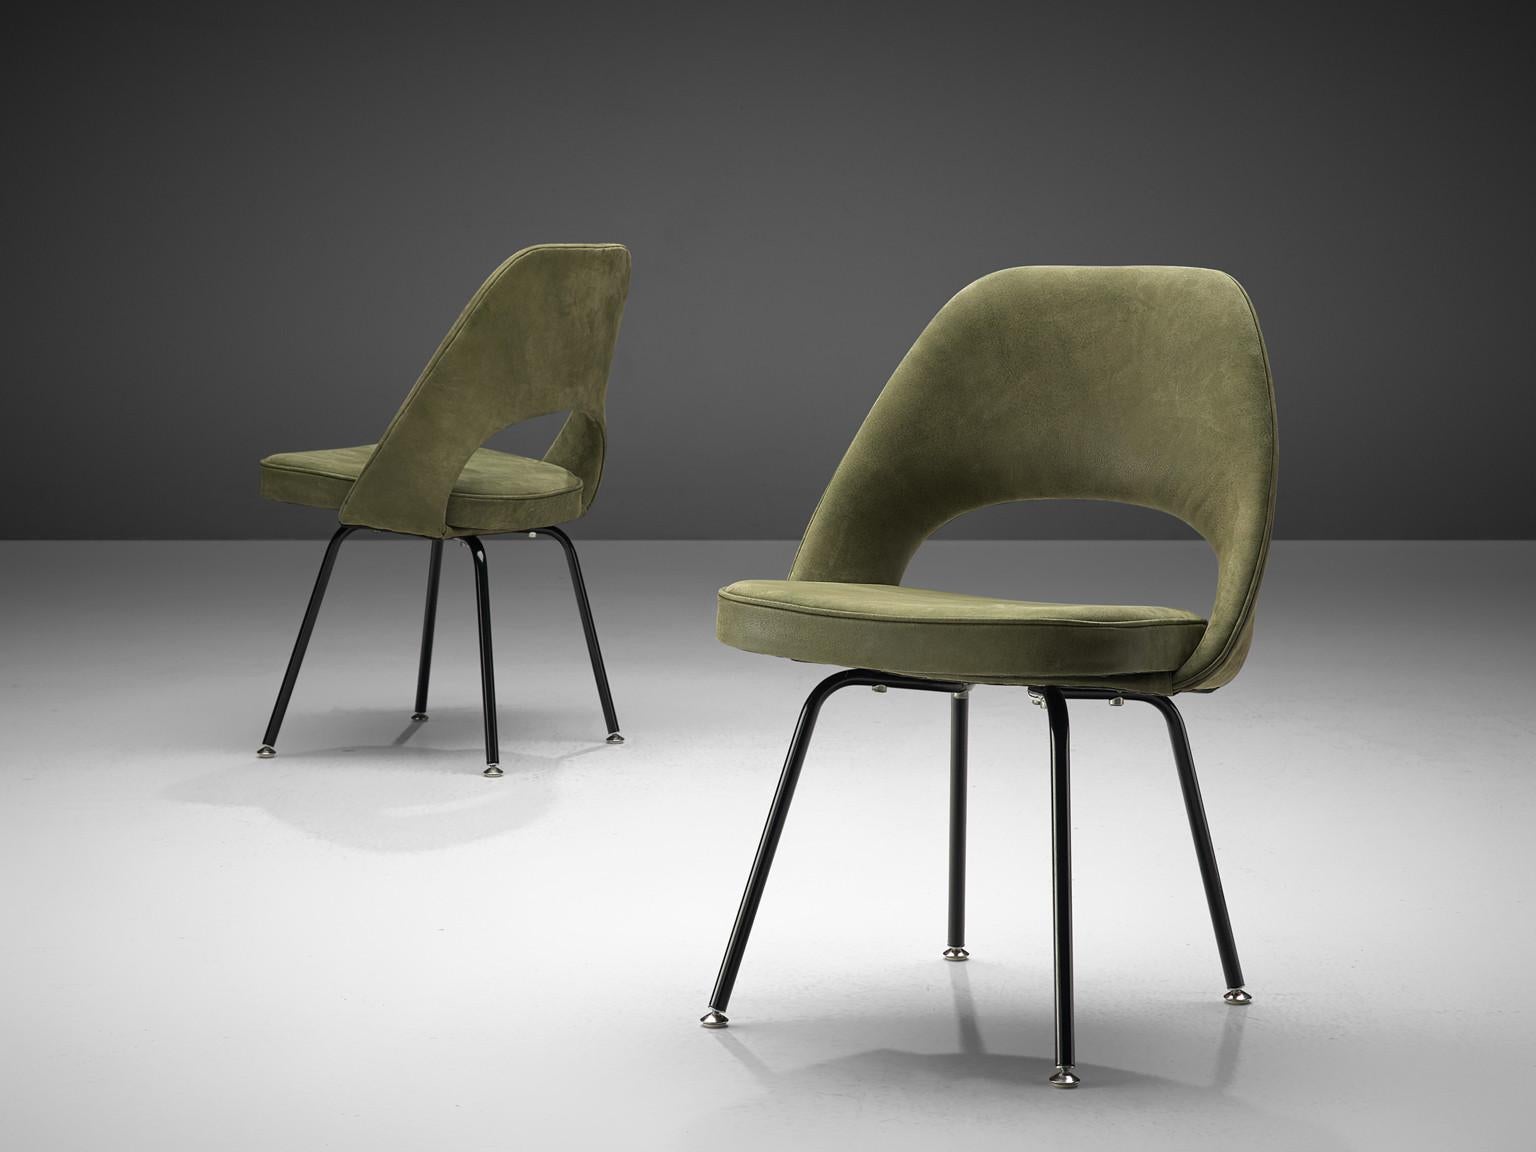 Eero Saarinen for Knoll International, pair of '72' dining chairs, black lacquered steel, reupholstered in green leather, United States, design 1948, later production

Pair of organic shaped chairs designed by Eero Saarinen. A fluid, sculptural